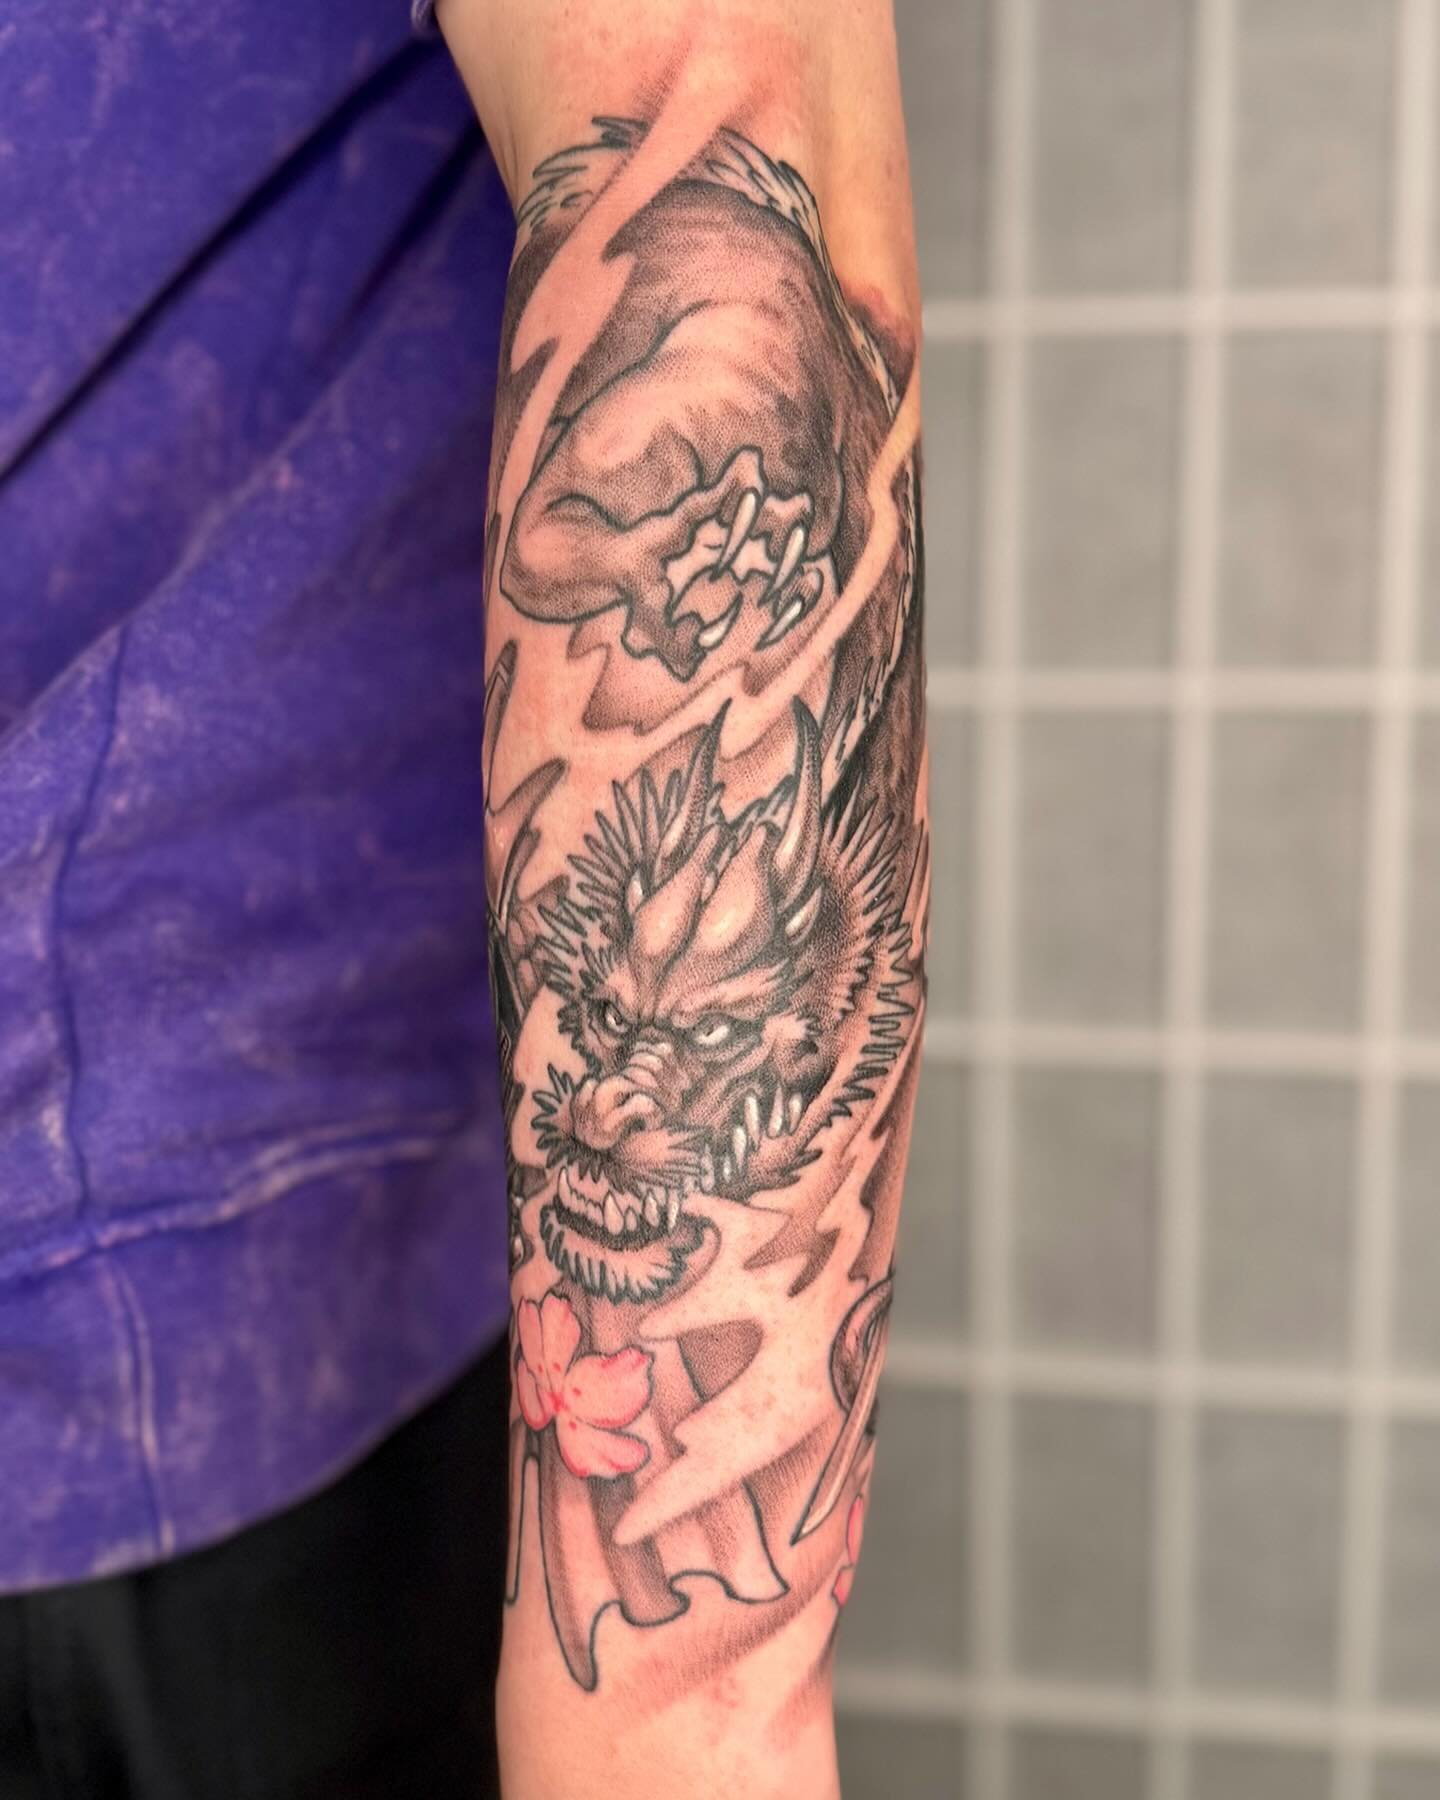 Two Session Half Sleeve for Tanner 🐲👹

Thank you for the trust during the process to make this piece come to life! Been a while since I&rsquo;ve posted, grateful for all my followers who continue to support this page. Summer is coming and April-Jun